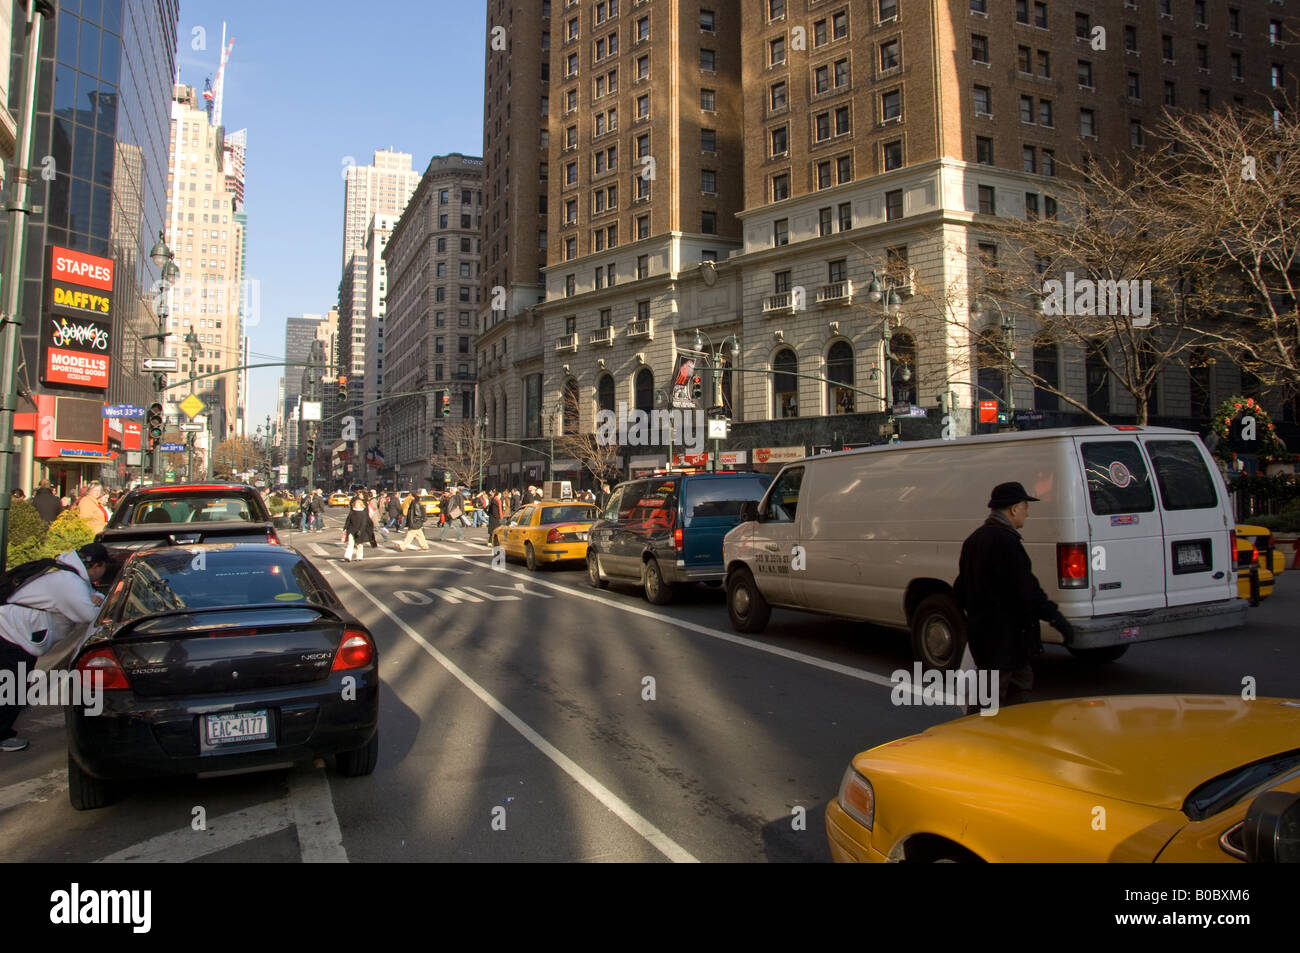 Cross Walk for Crowds walking the busy streets of New York City, Manhattan Stock Photo